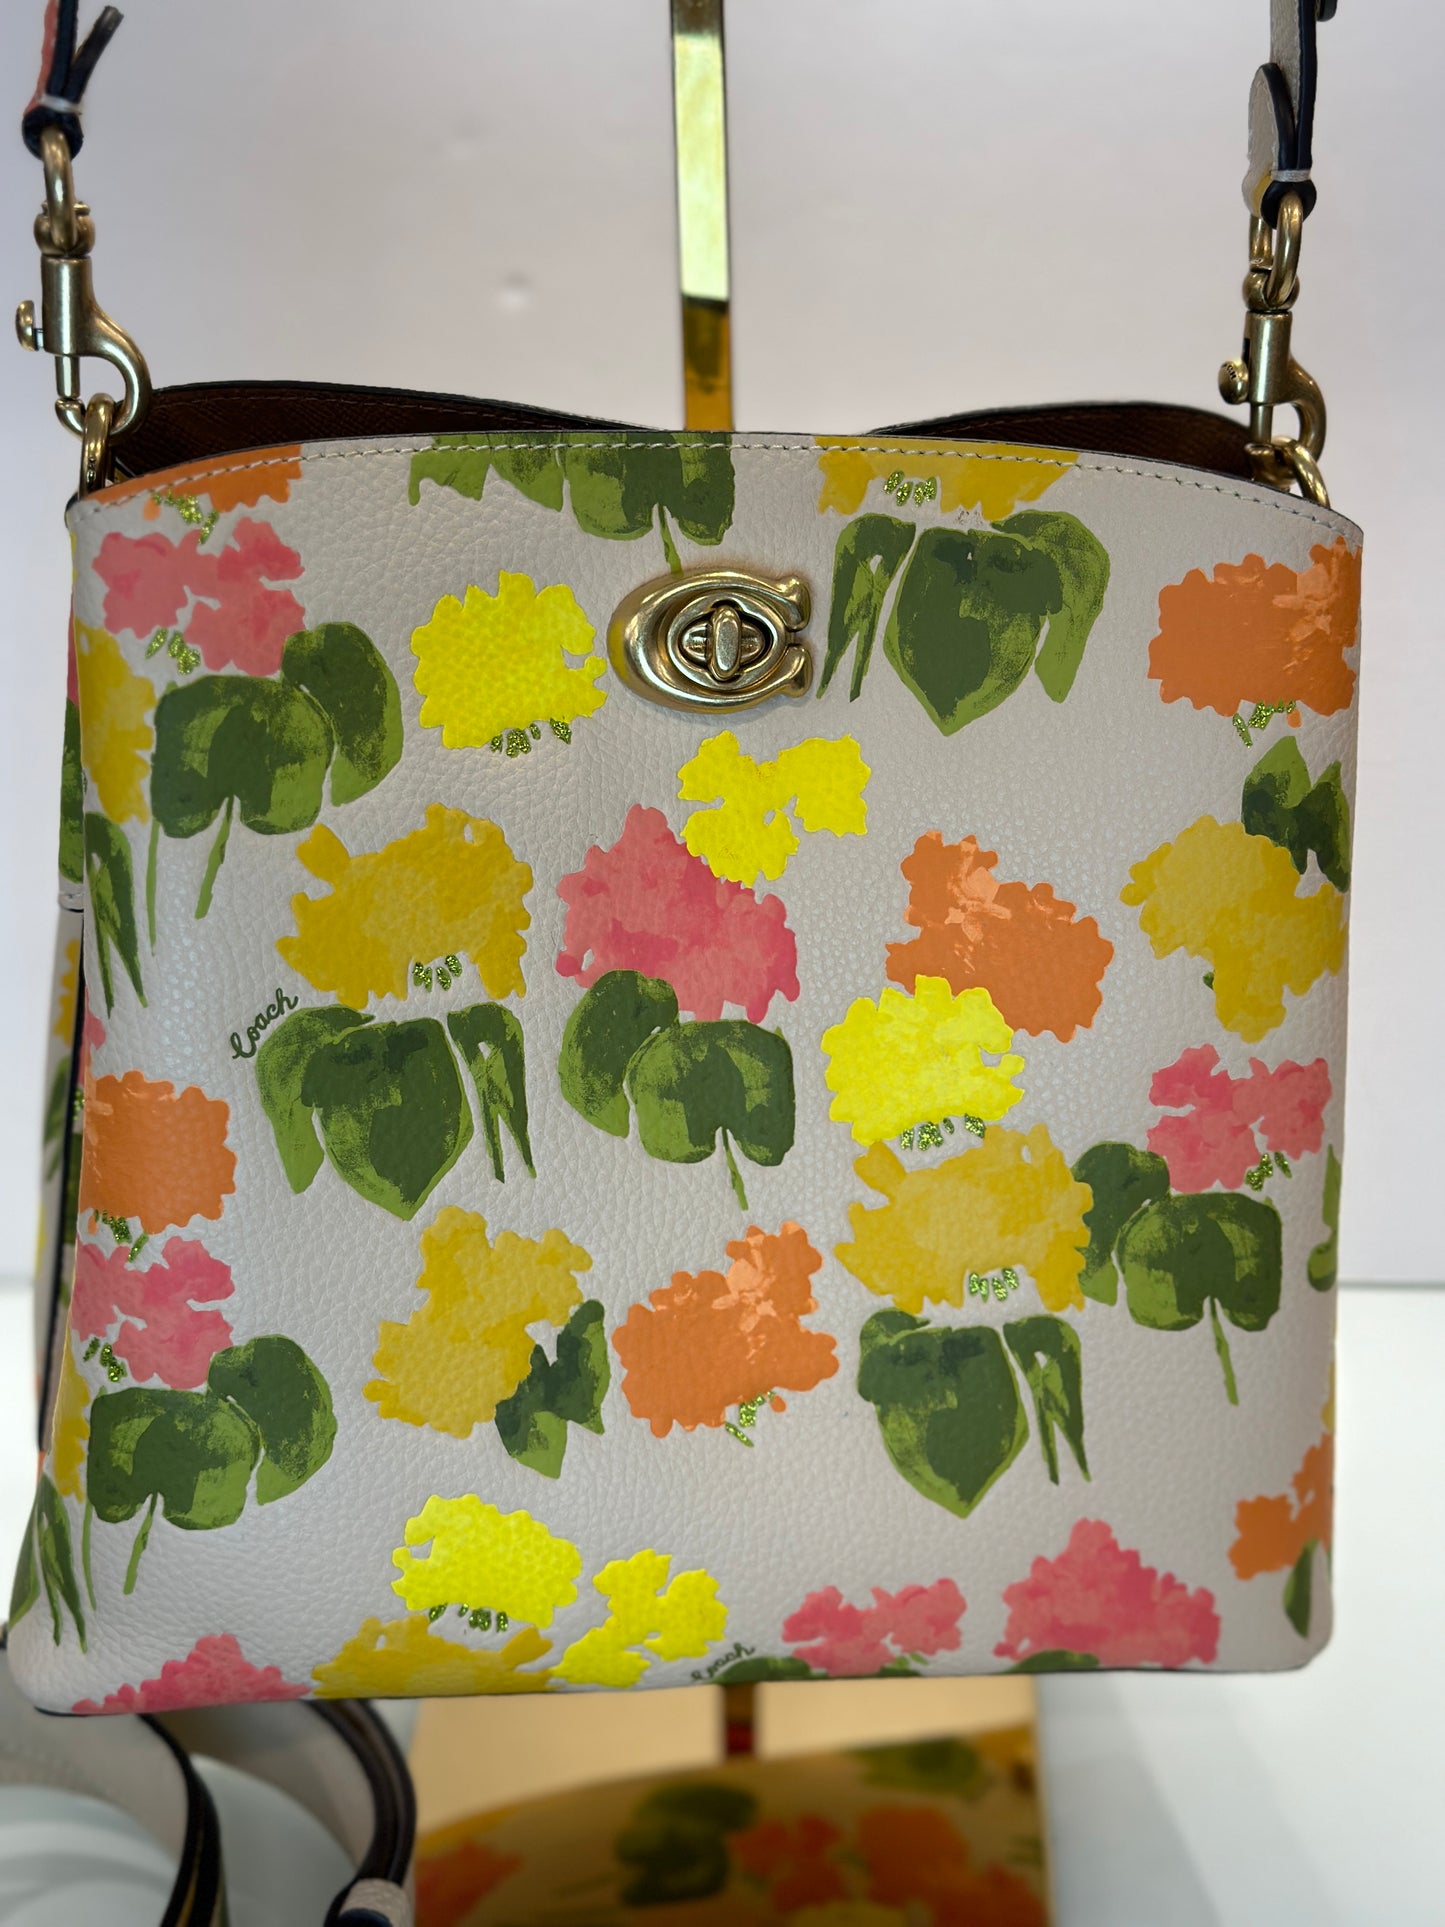 COACH Floral Print Willow Bucket bag